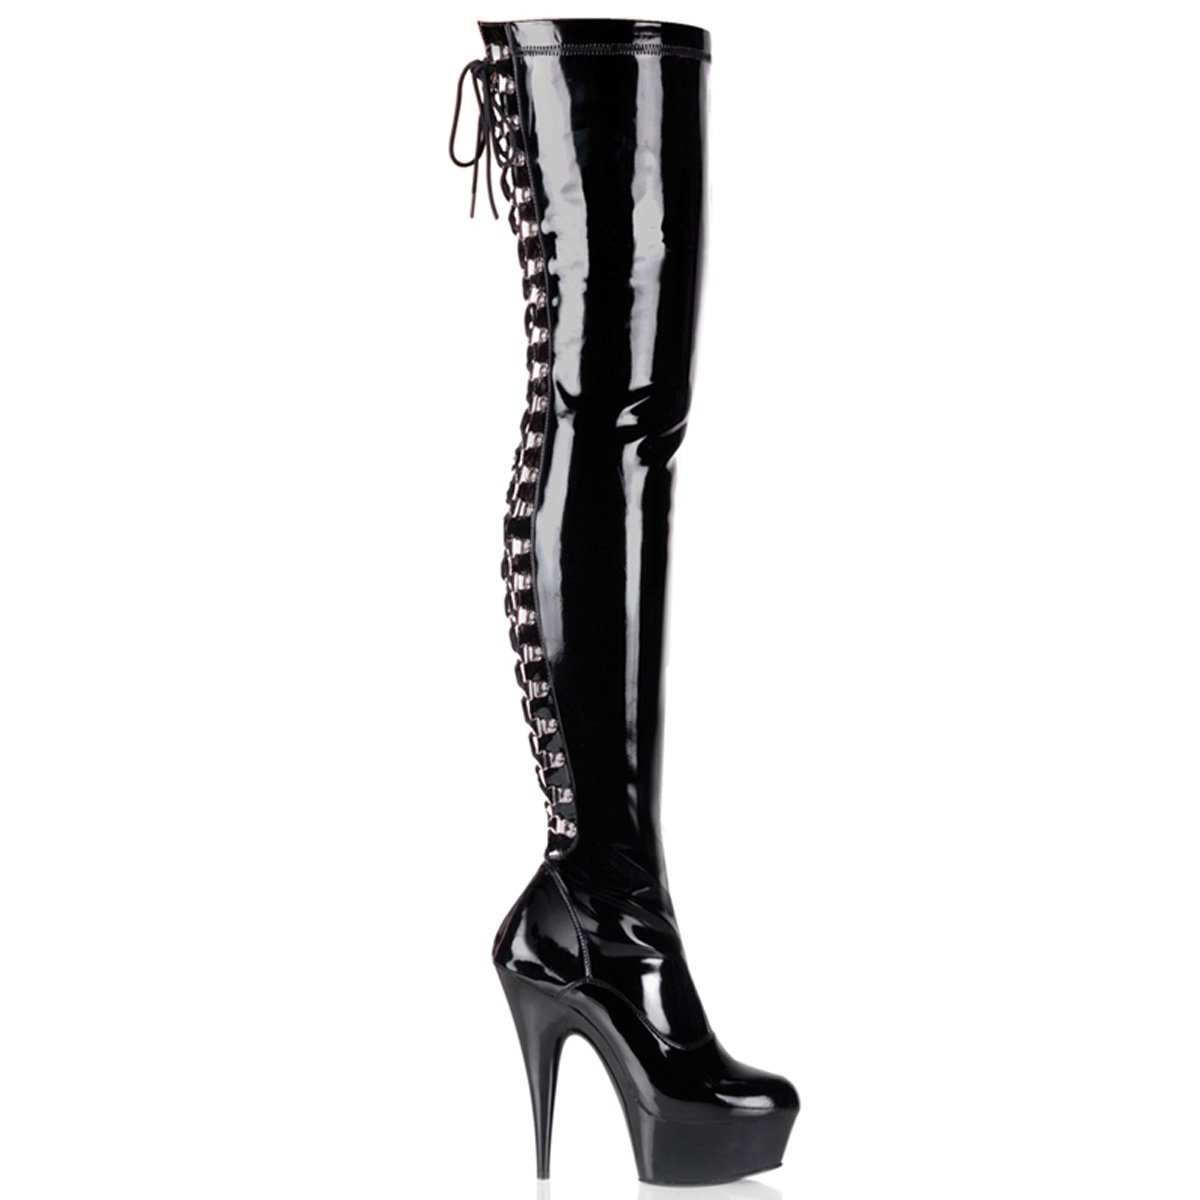 Pleaser Delight-3063 Platforms | Buy Sexy Shoes at Shoefreaks.ca